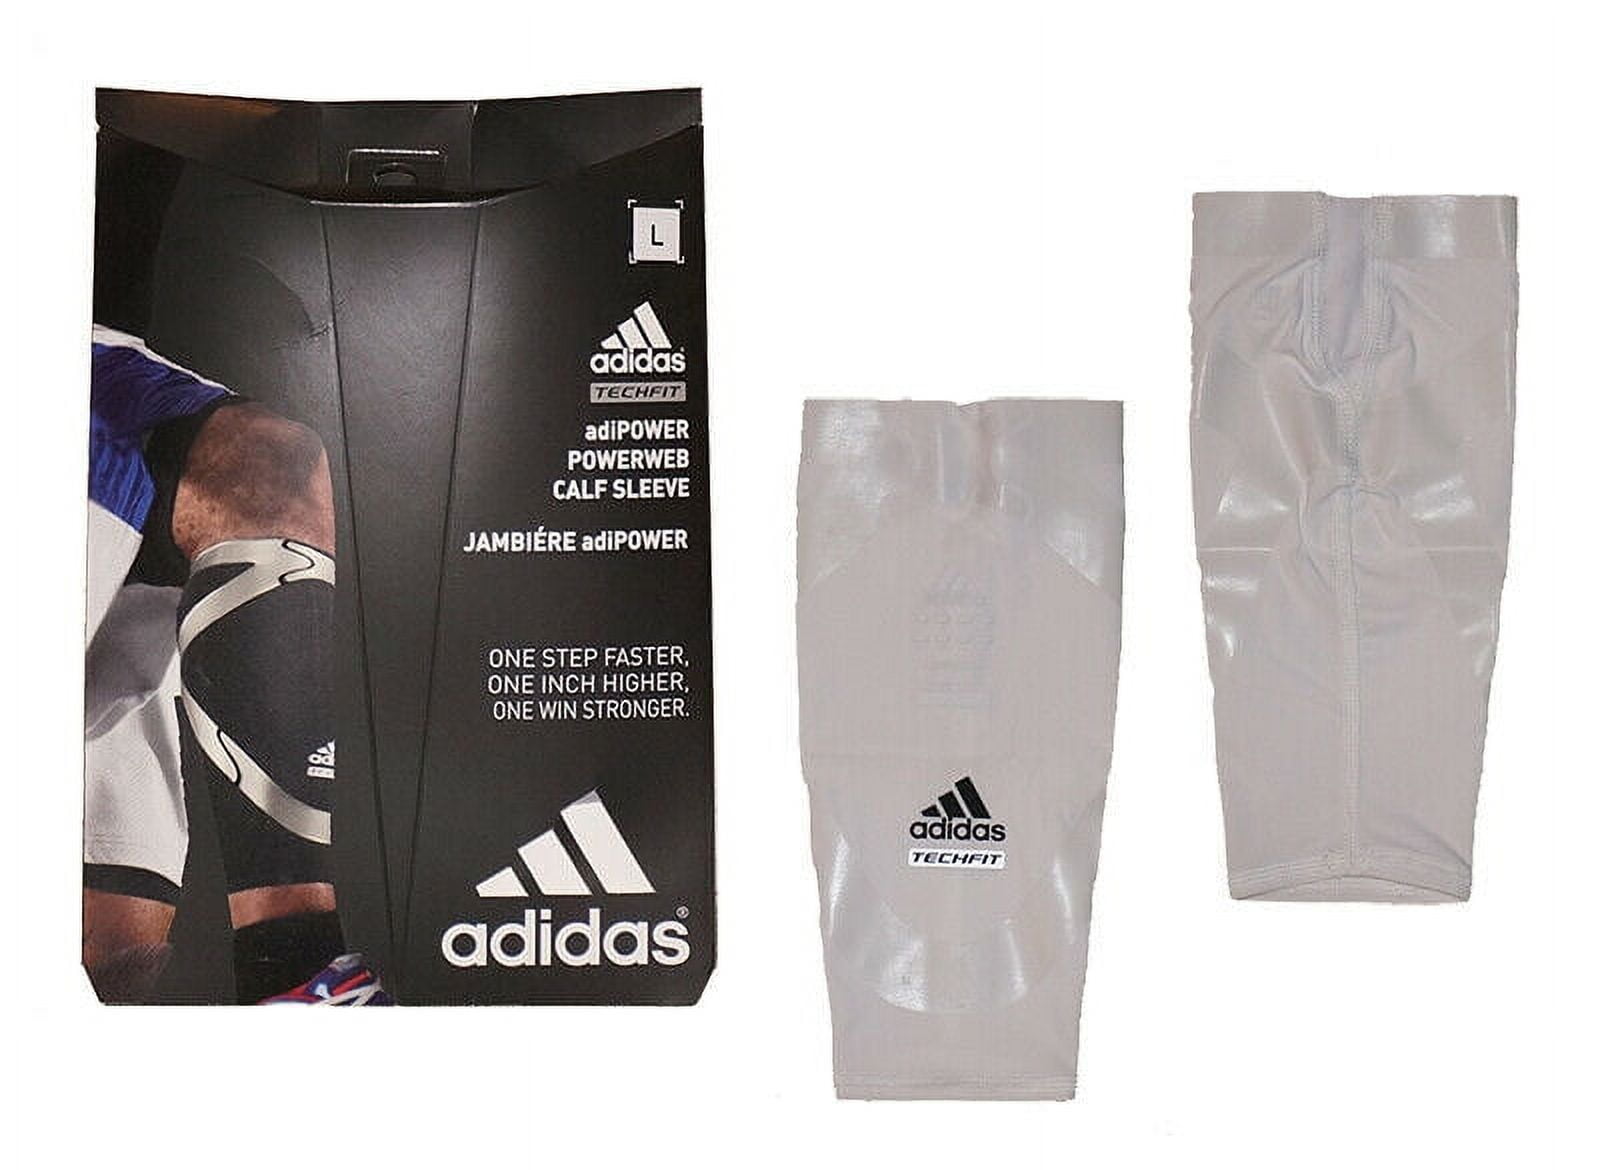 Adidas Compression Fit Calf Sleeves Sports Lightweight Support Size L/XL -  Grey